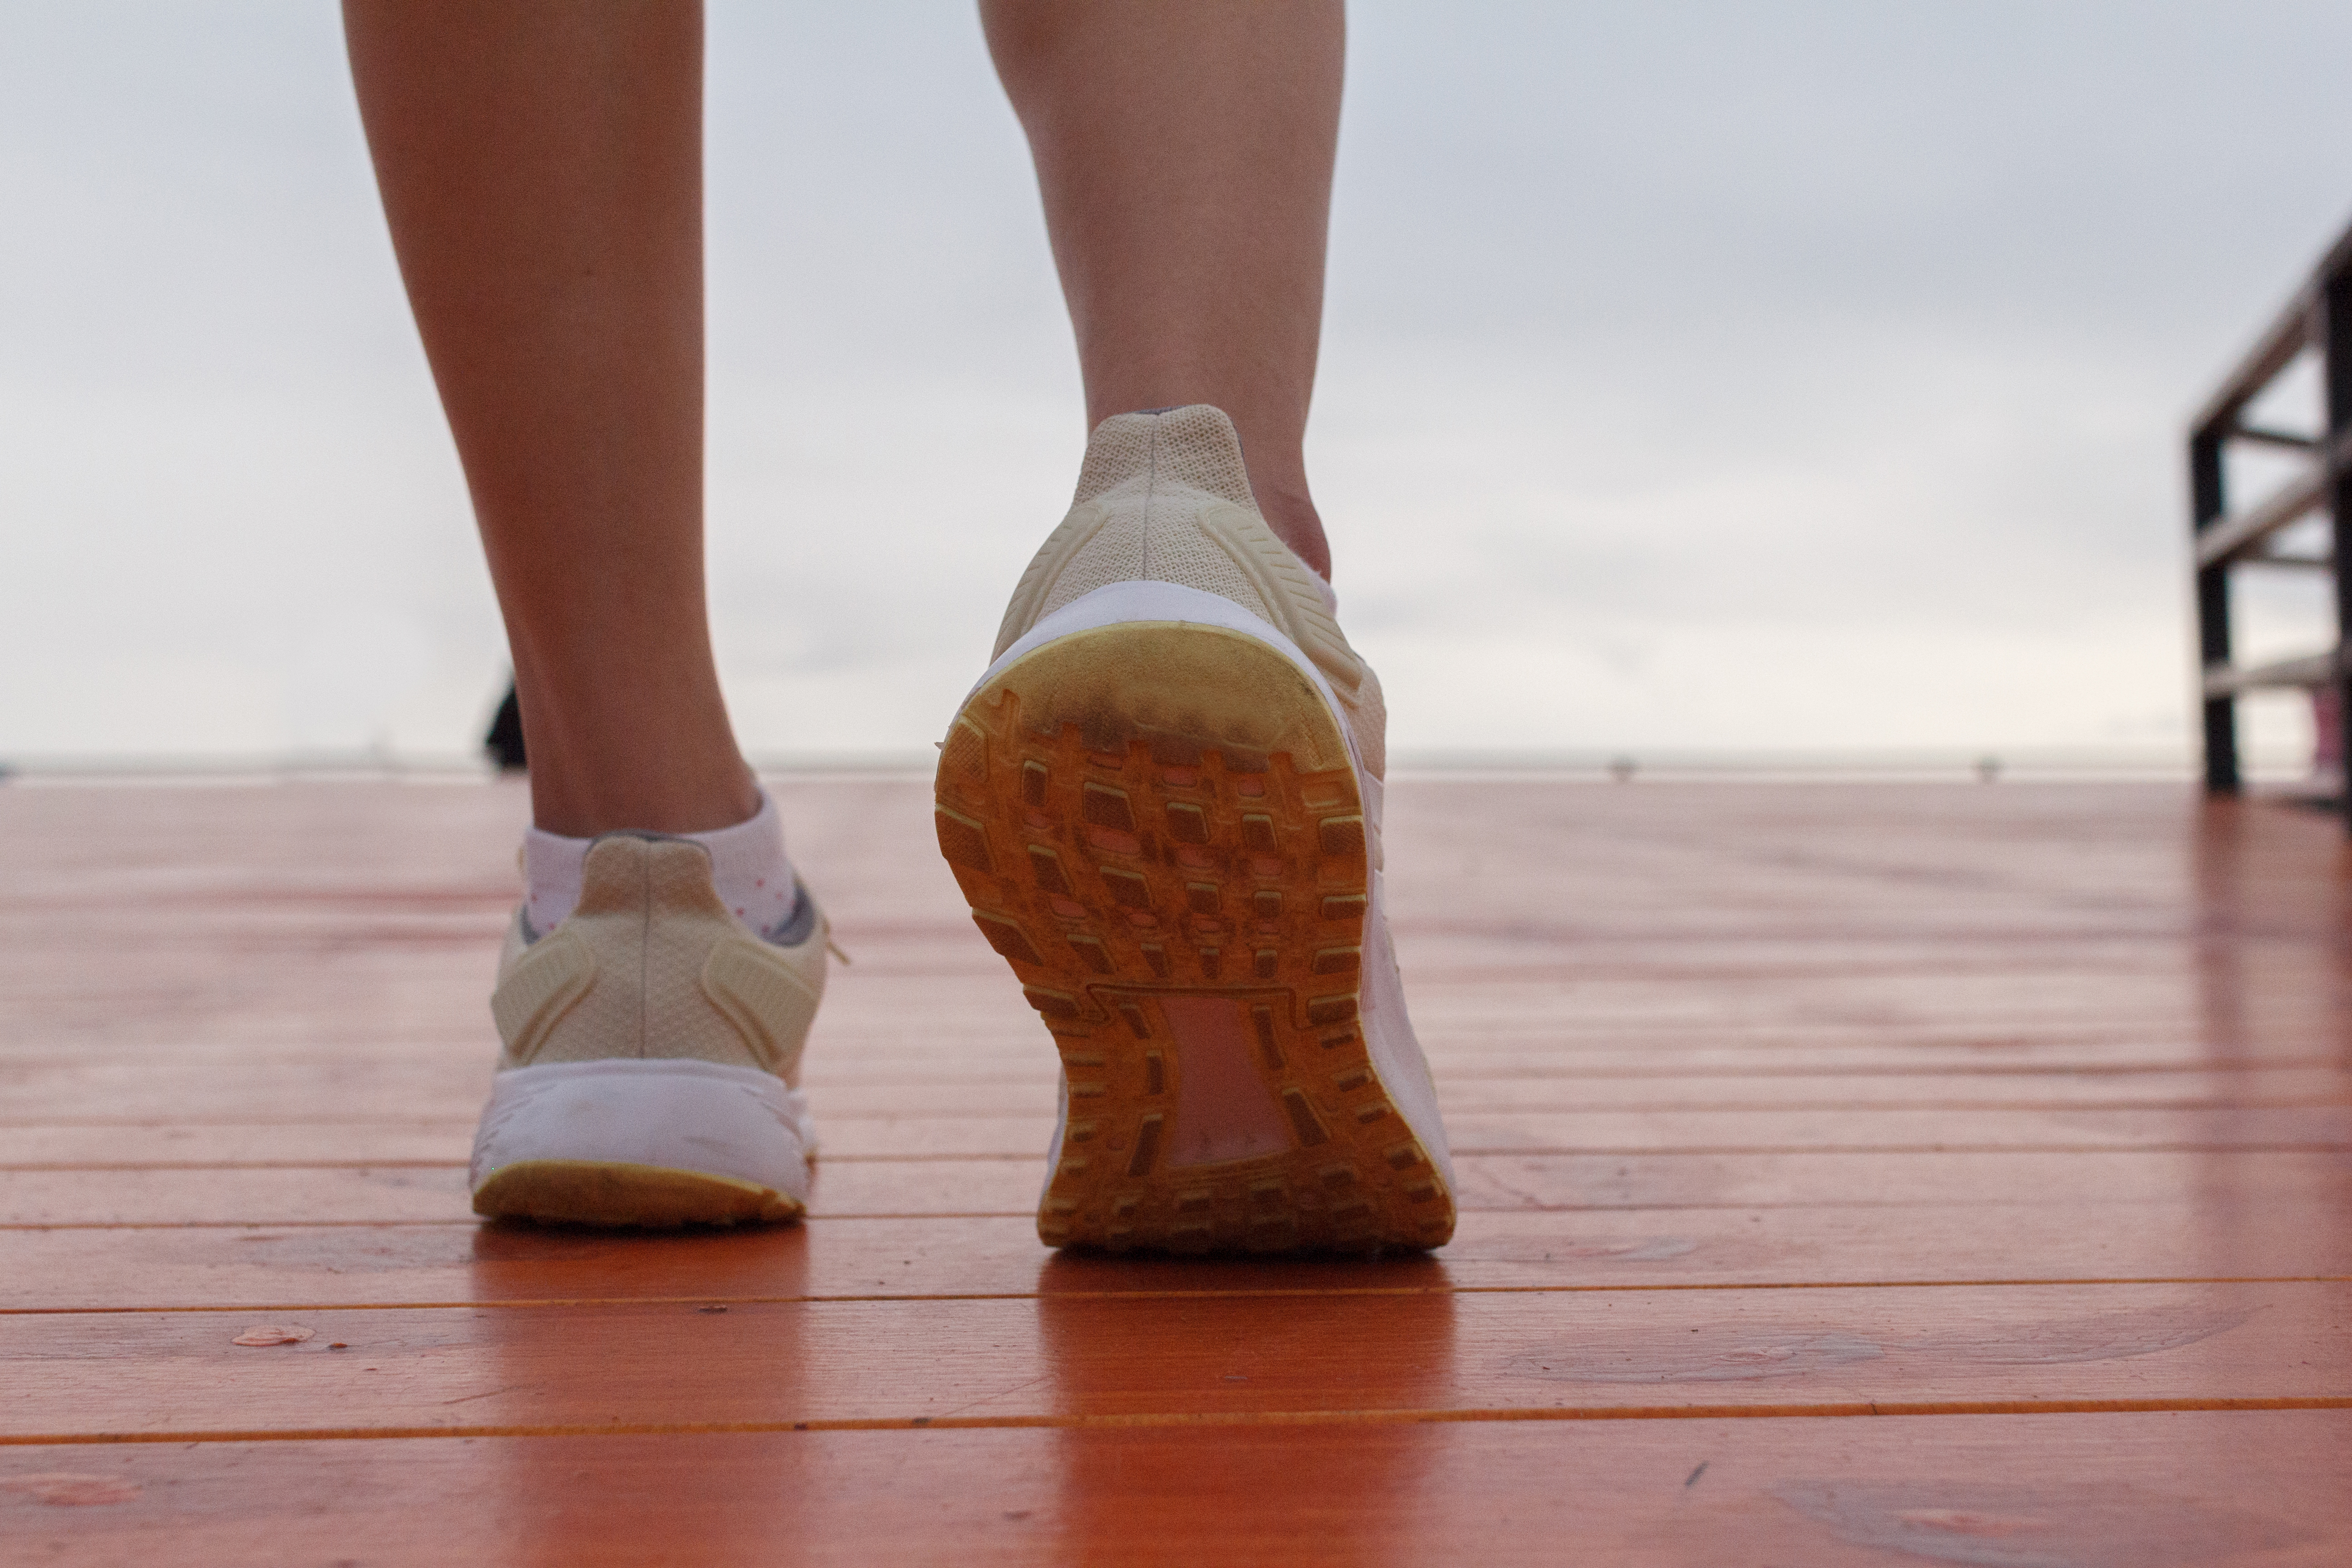 Why Is Walking the Most Popular Form of Exercise?